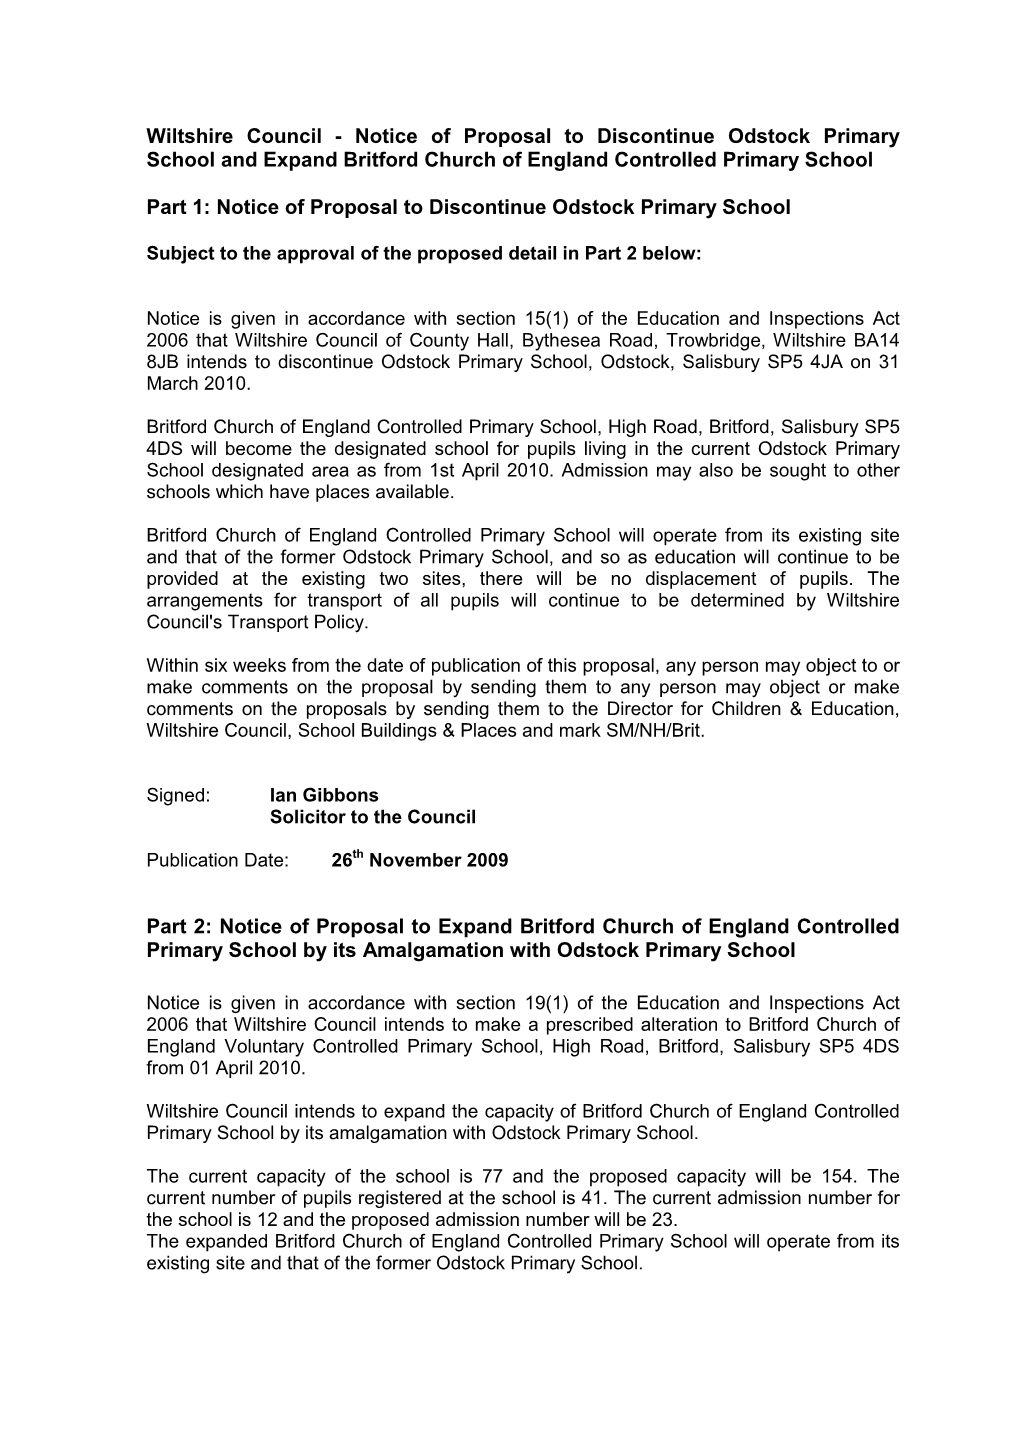 Notice of Proposal to Discontinue Odstock Primary School and Expand Britford Church of England Controlled Primary School